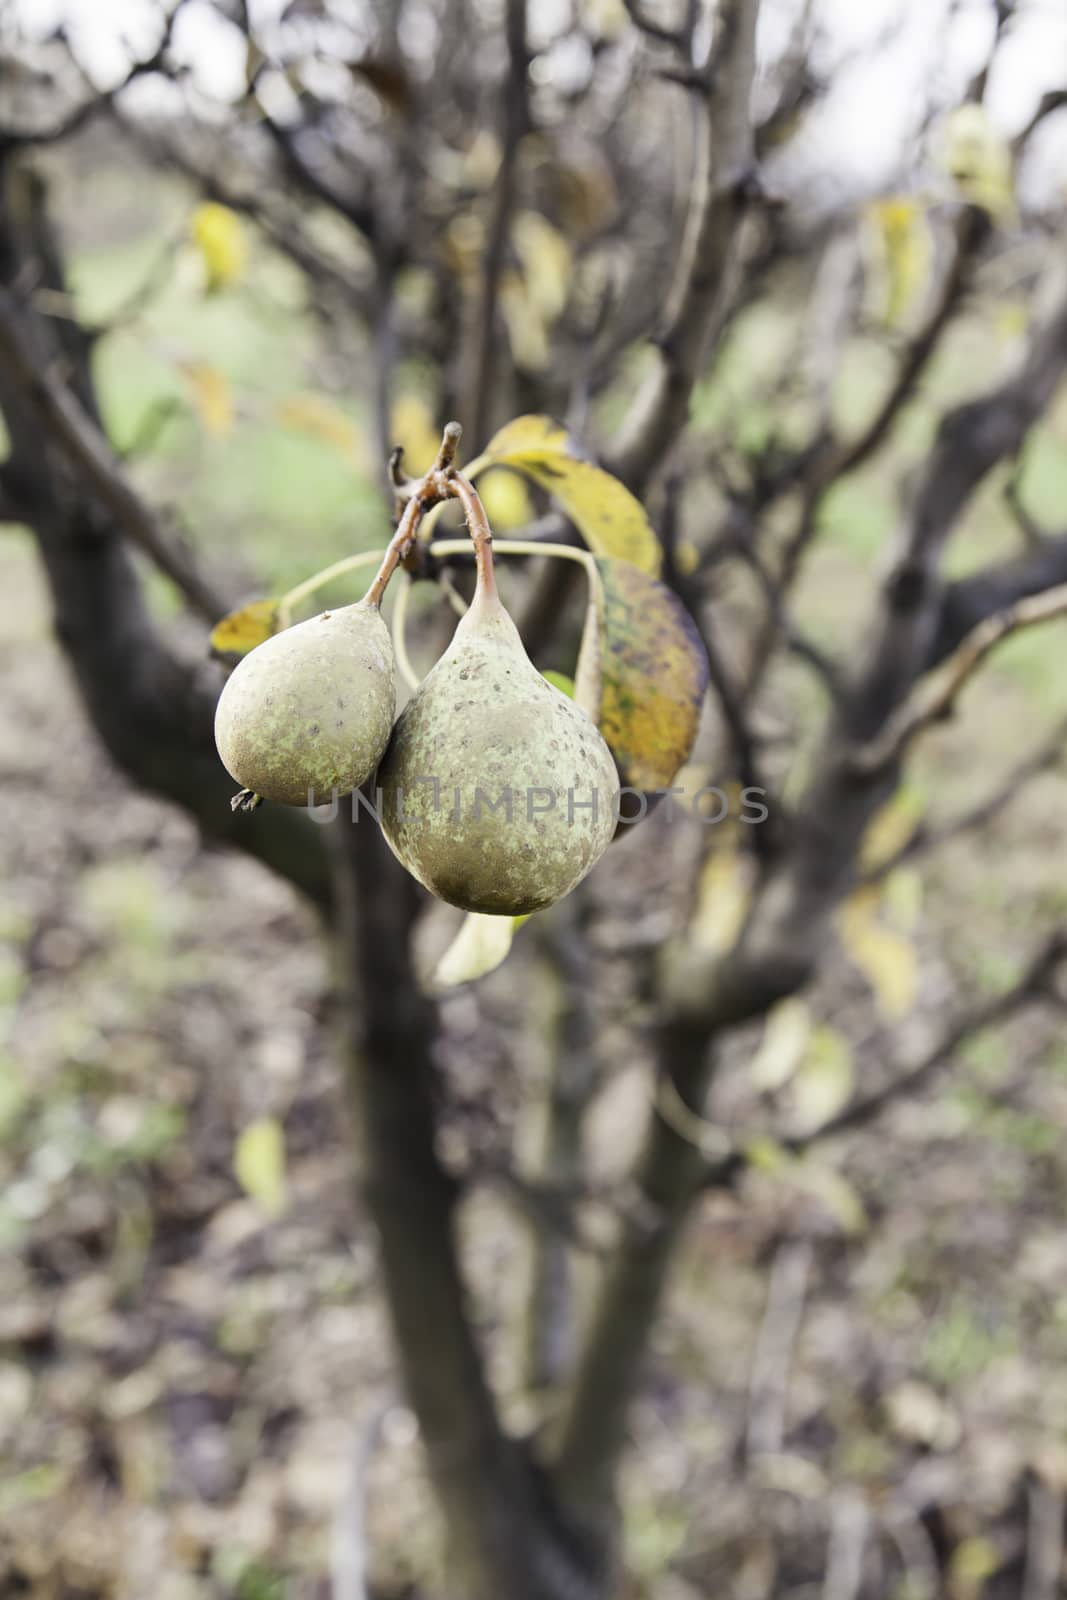 Pears on a tree, detail of fruit growing in the wild